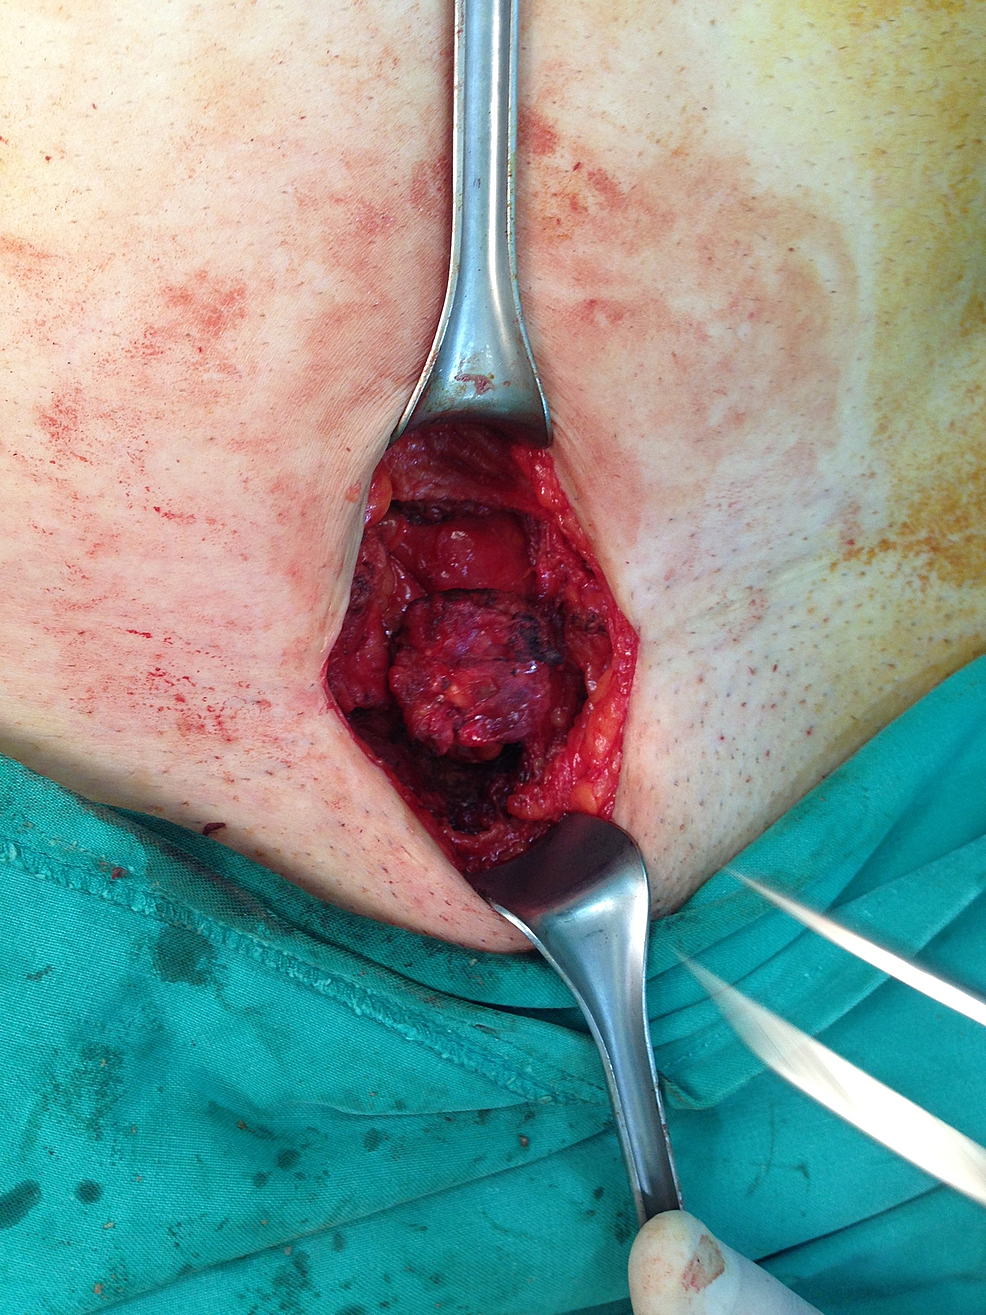 Intraoperative-image-showing-the-endometrioma-in-the-subcutaneous-tissue-of-the-abdominal-wall.